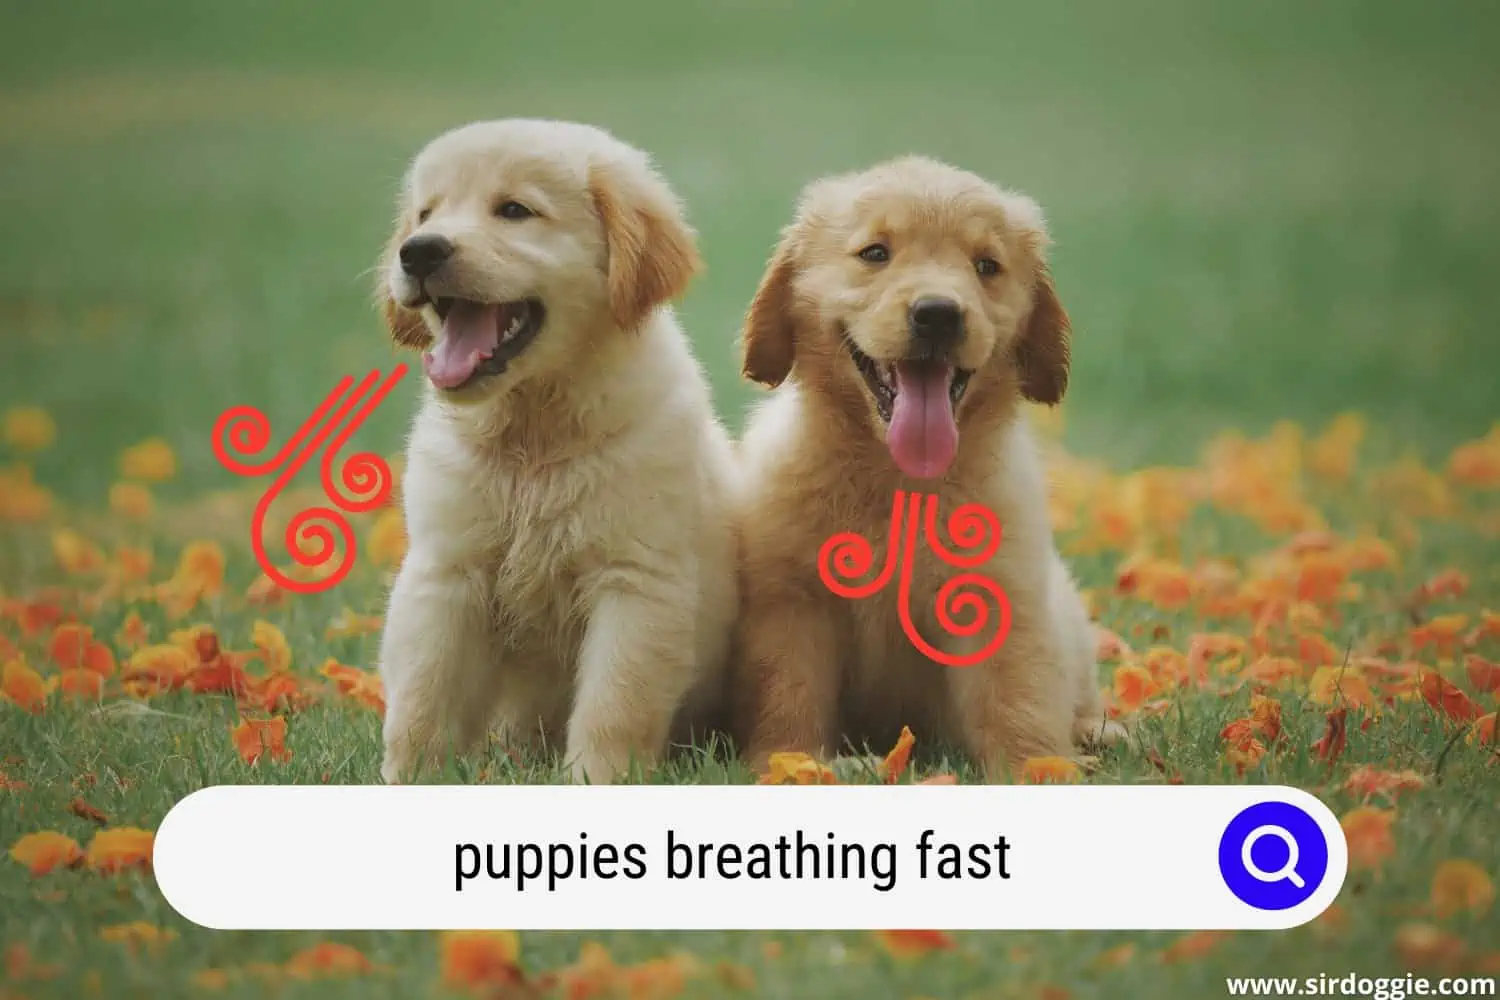 Adorable puppies breathing fast while resting